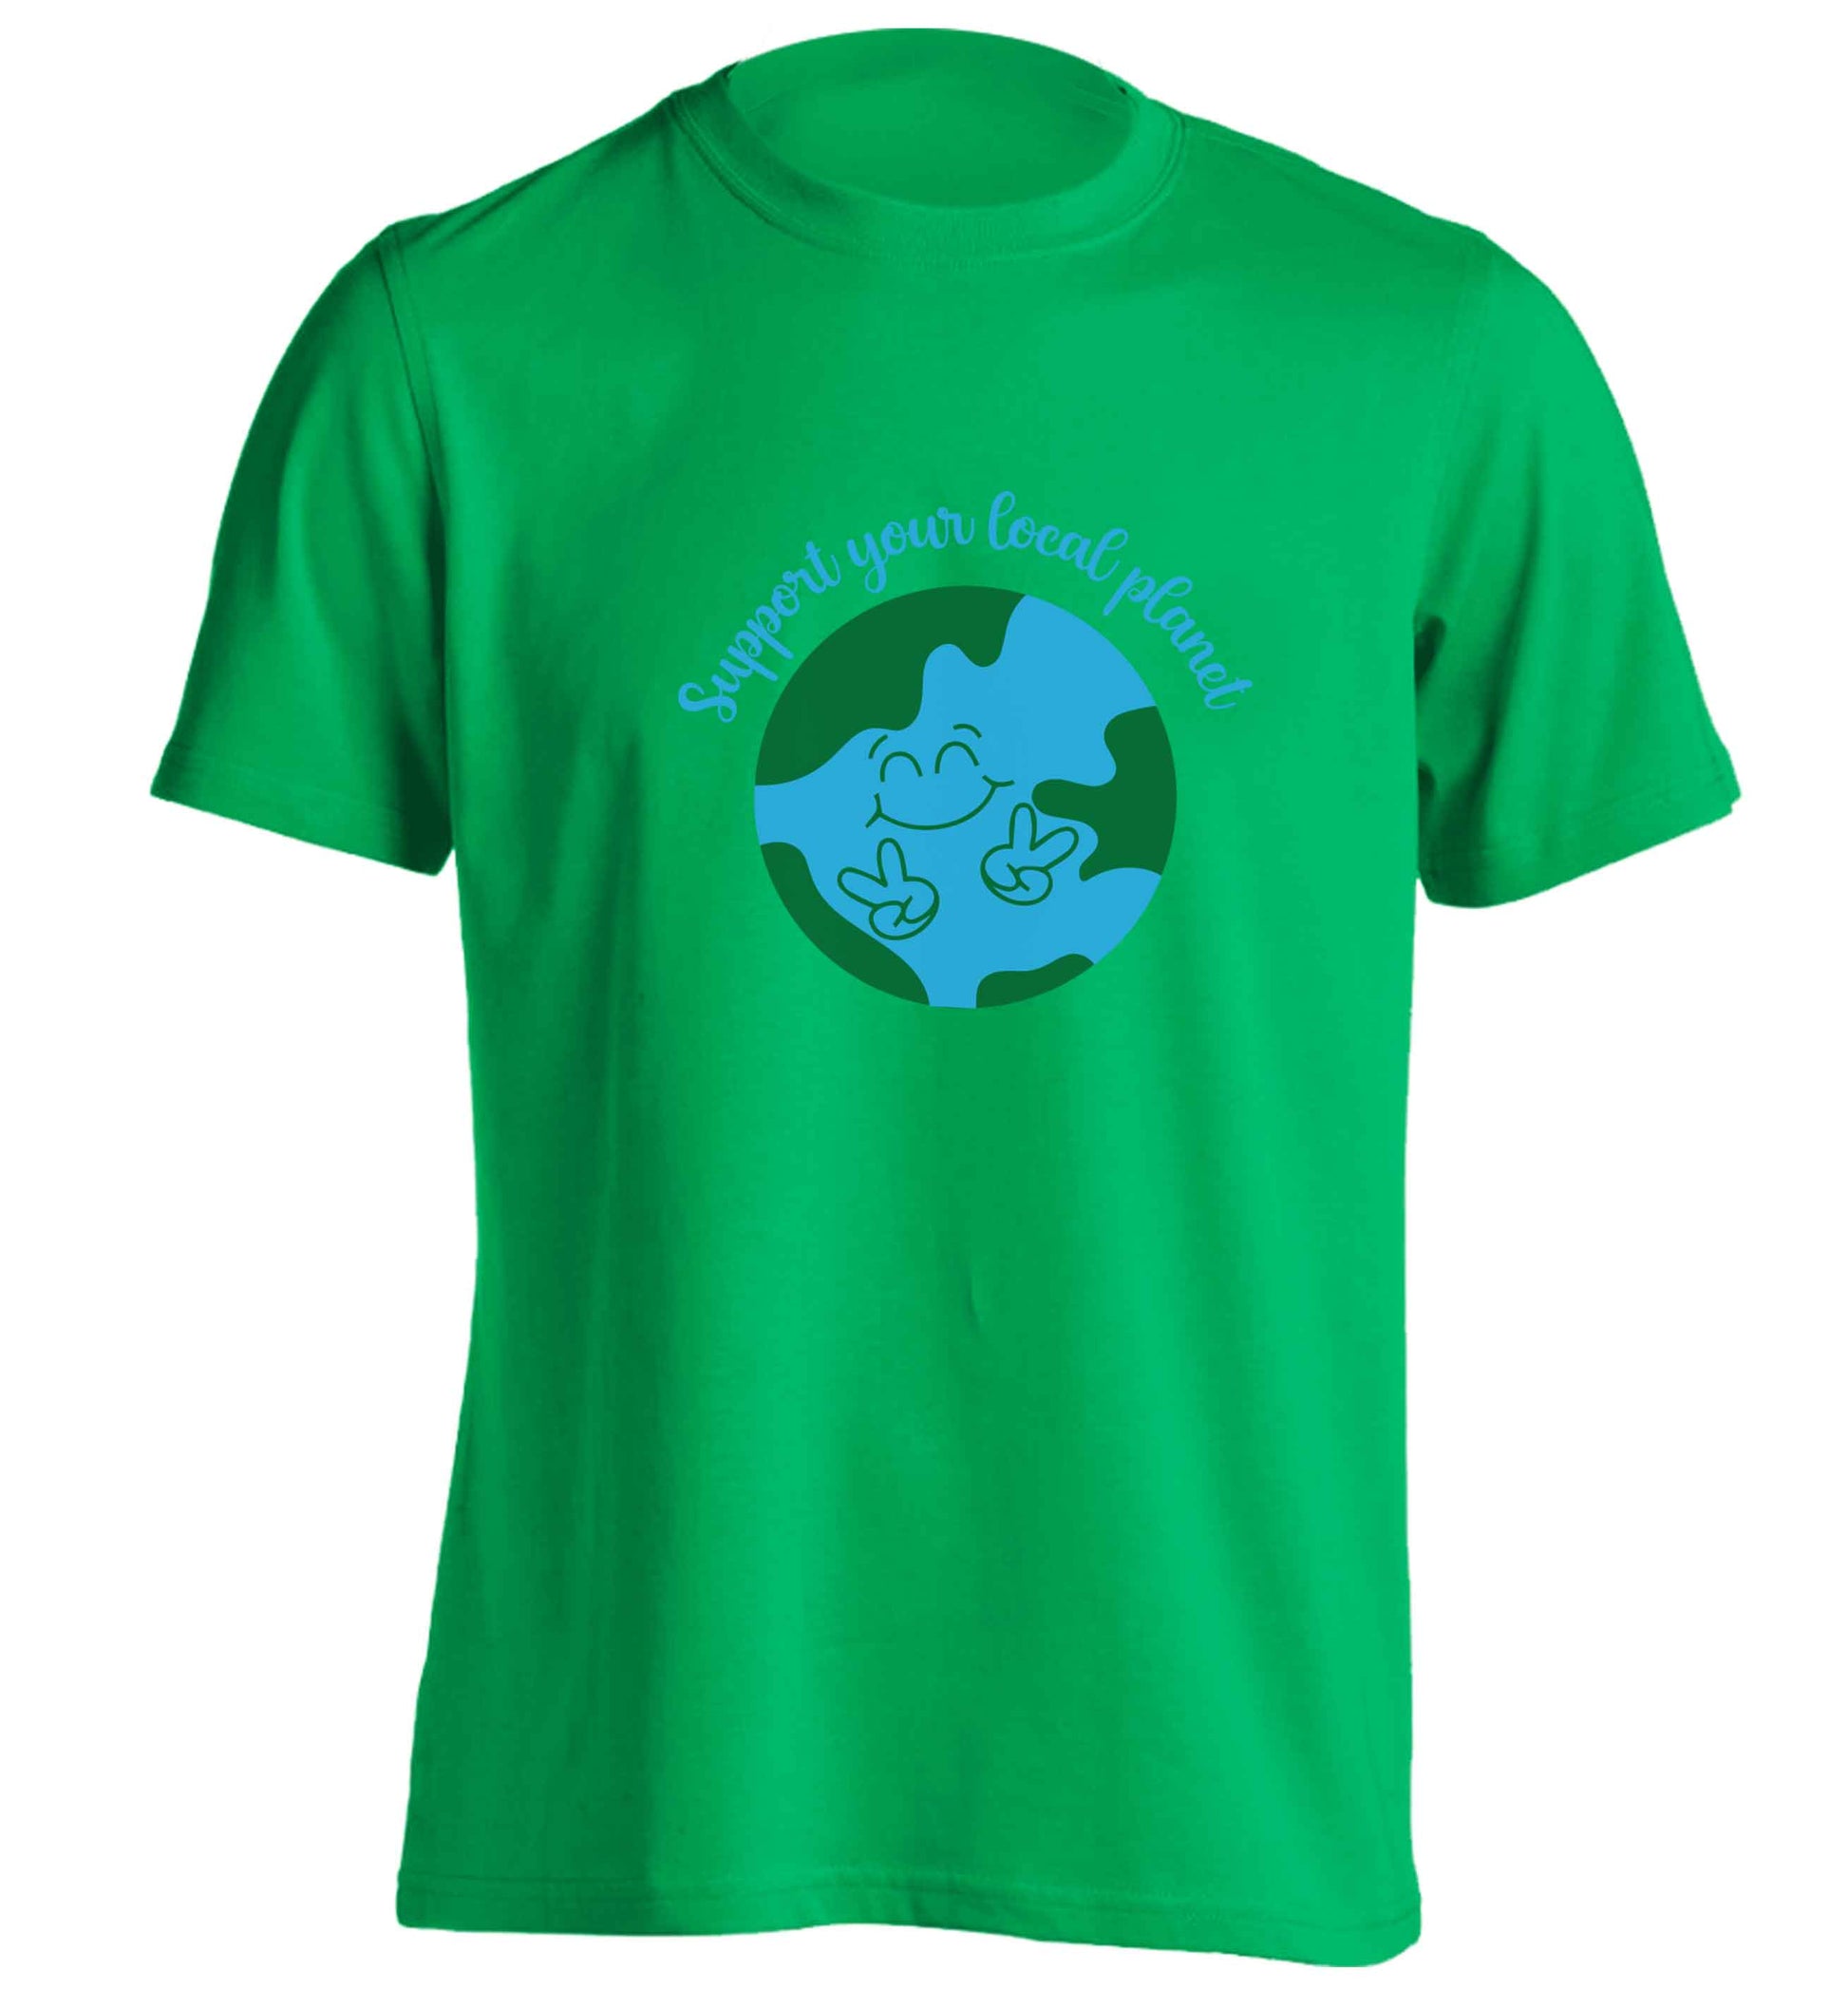 Support your local planet adults unisex green Tshirt 2XL